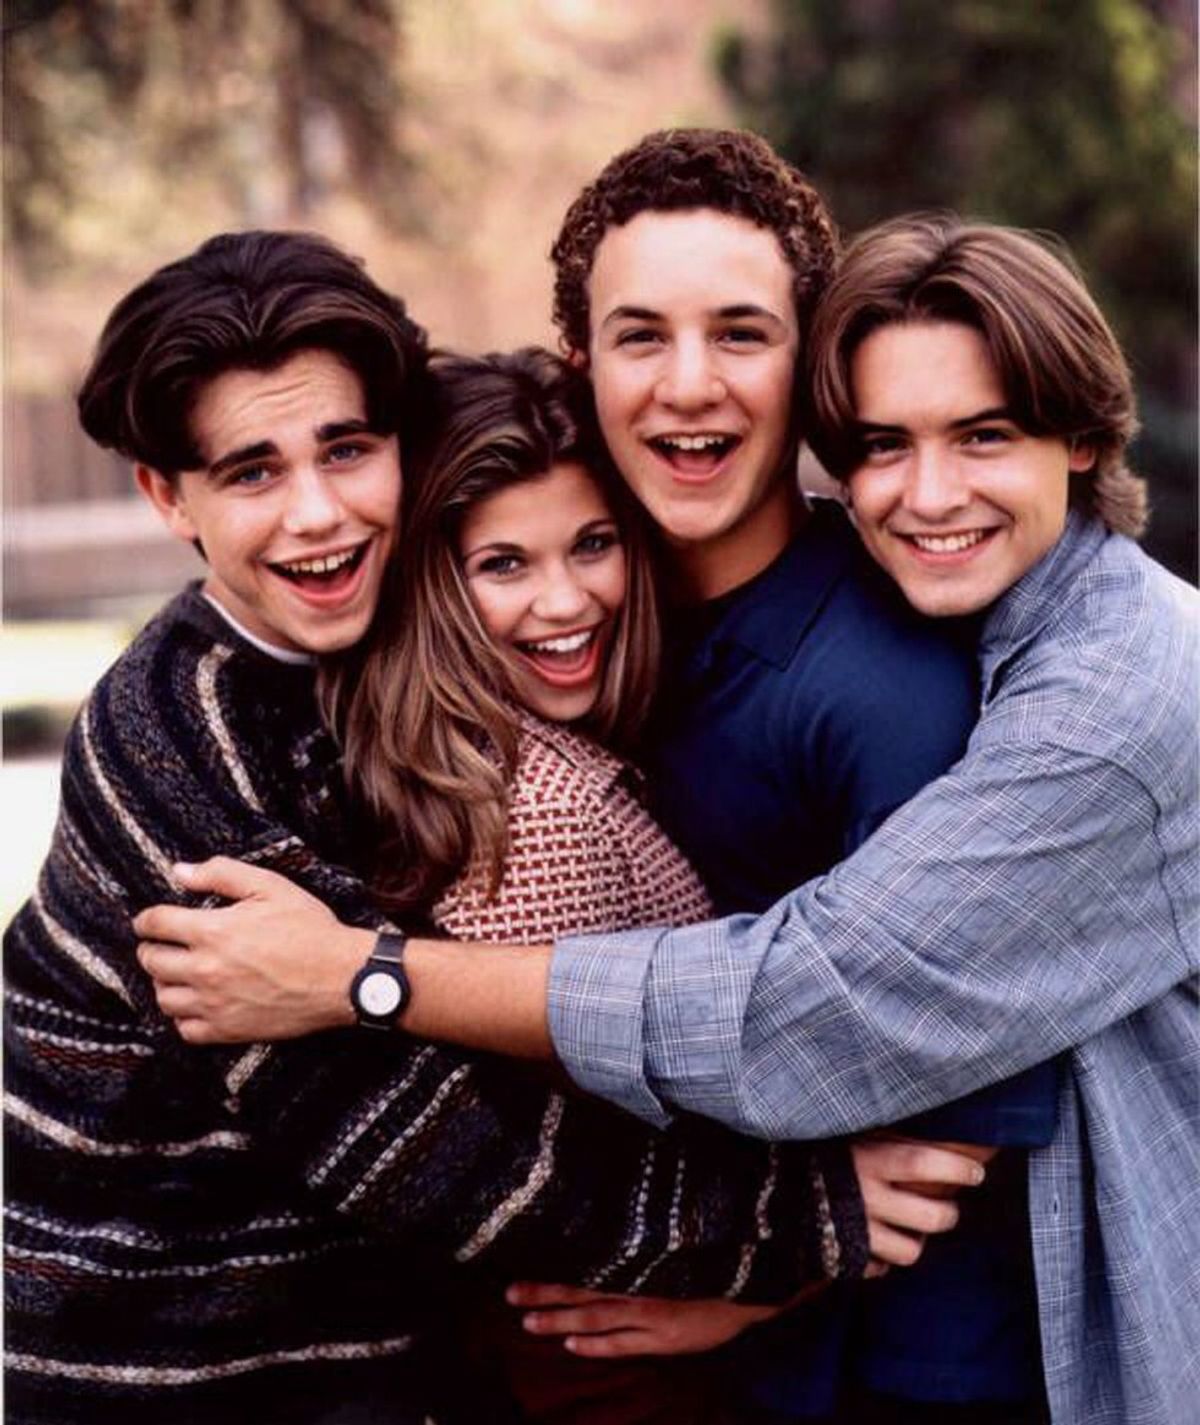 Life Lessons We All Learned From Watching "Boy Meets World"